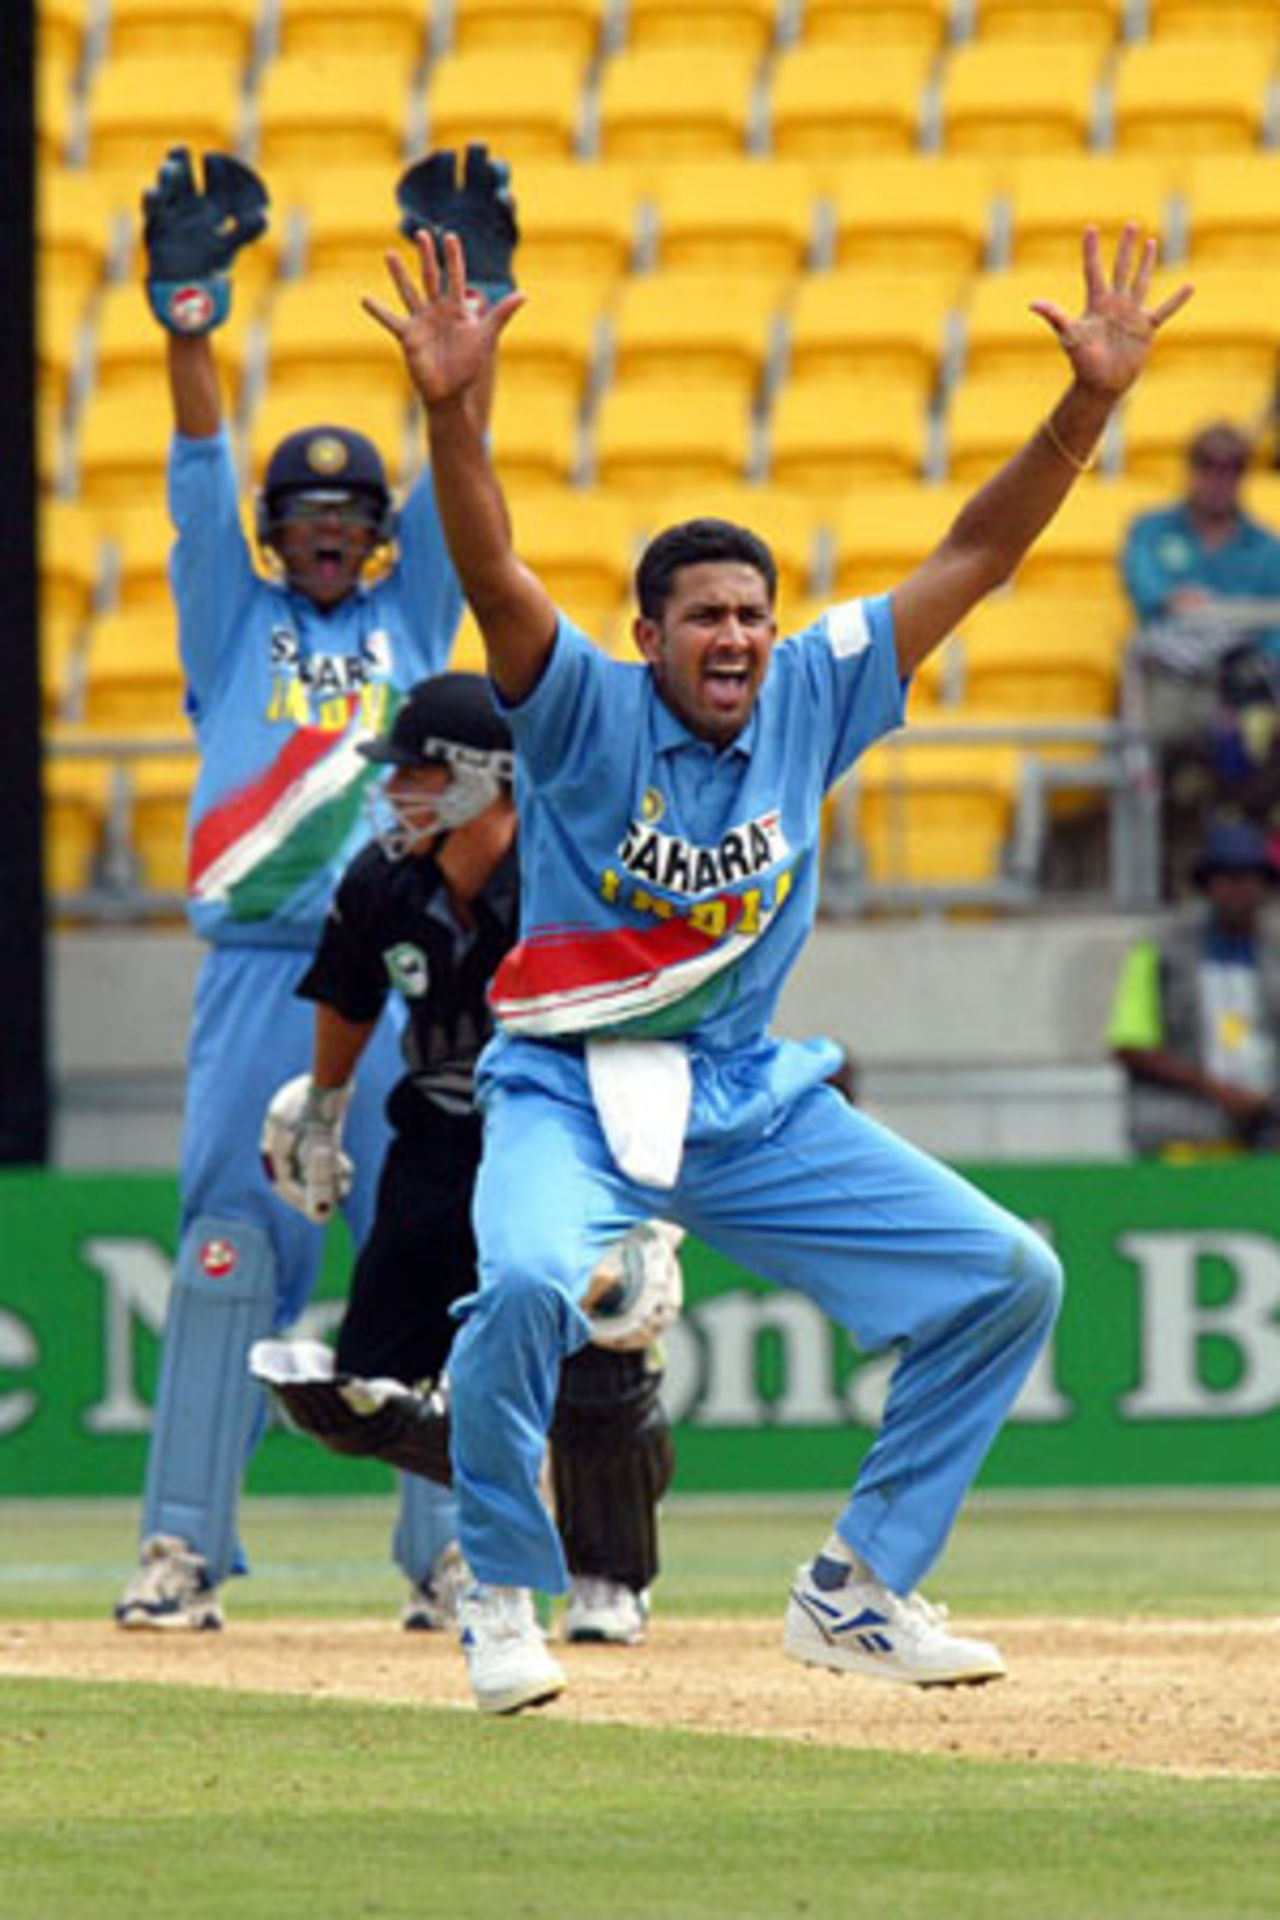 Indian bowler Anil Kumble successfully appeals for lbw to dismiss New Zealand batsman Shane Bond for 0. Wicket-keeper Rahul Dravid joins in the appeal in the background. 5th ODI: New Zealand v India at Westpac Stadium, Wellington, 8 January 2003.